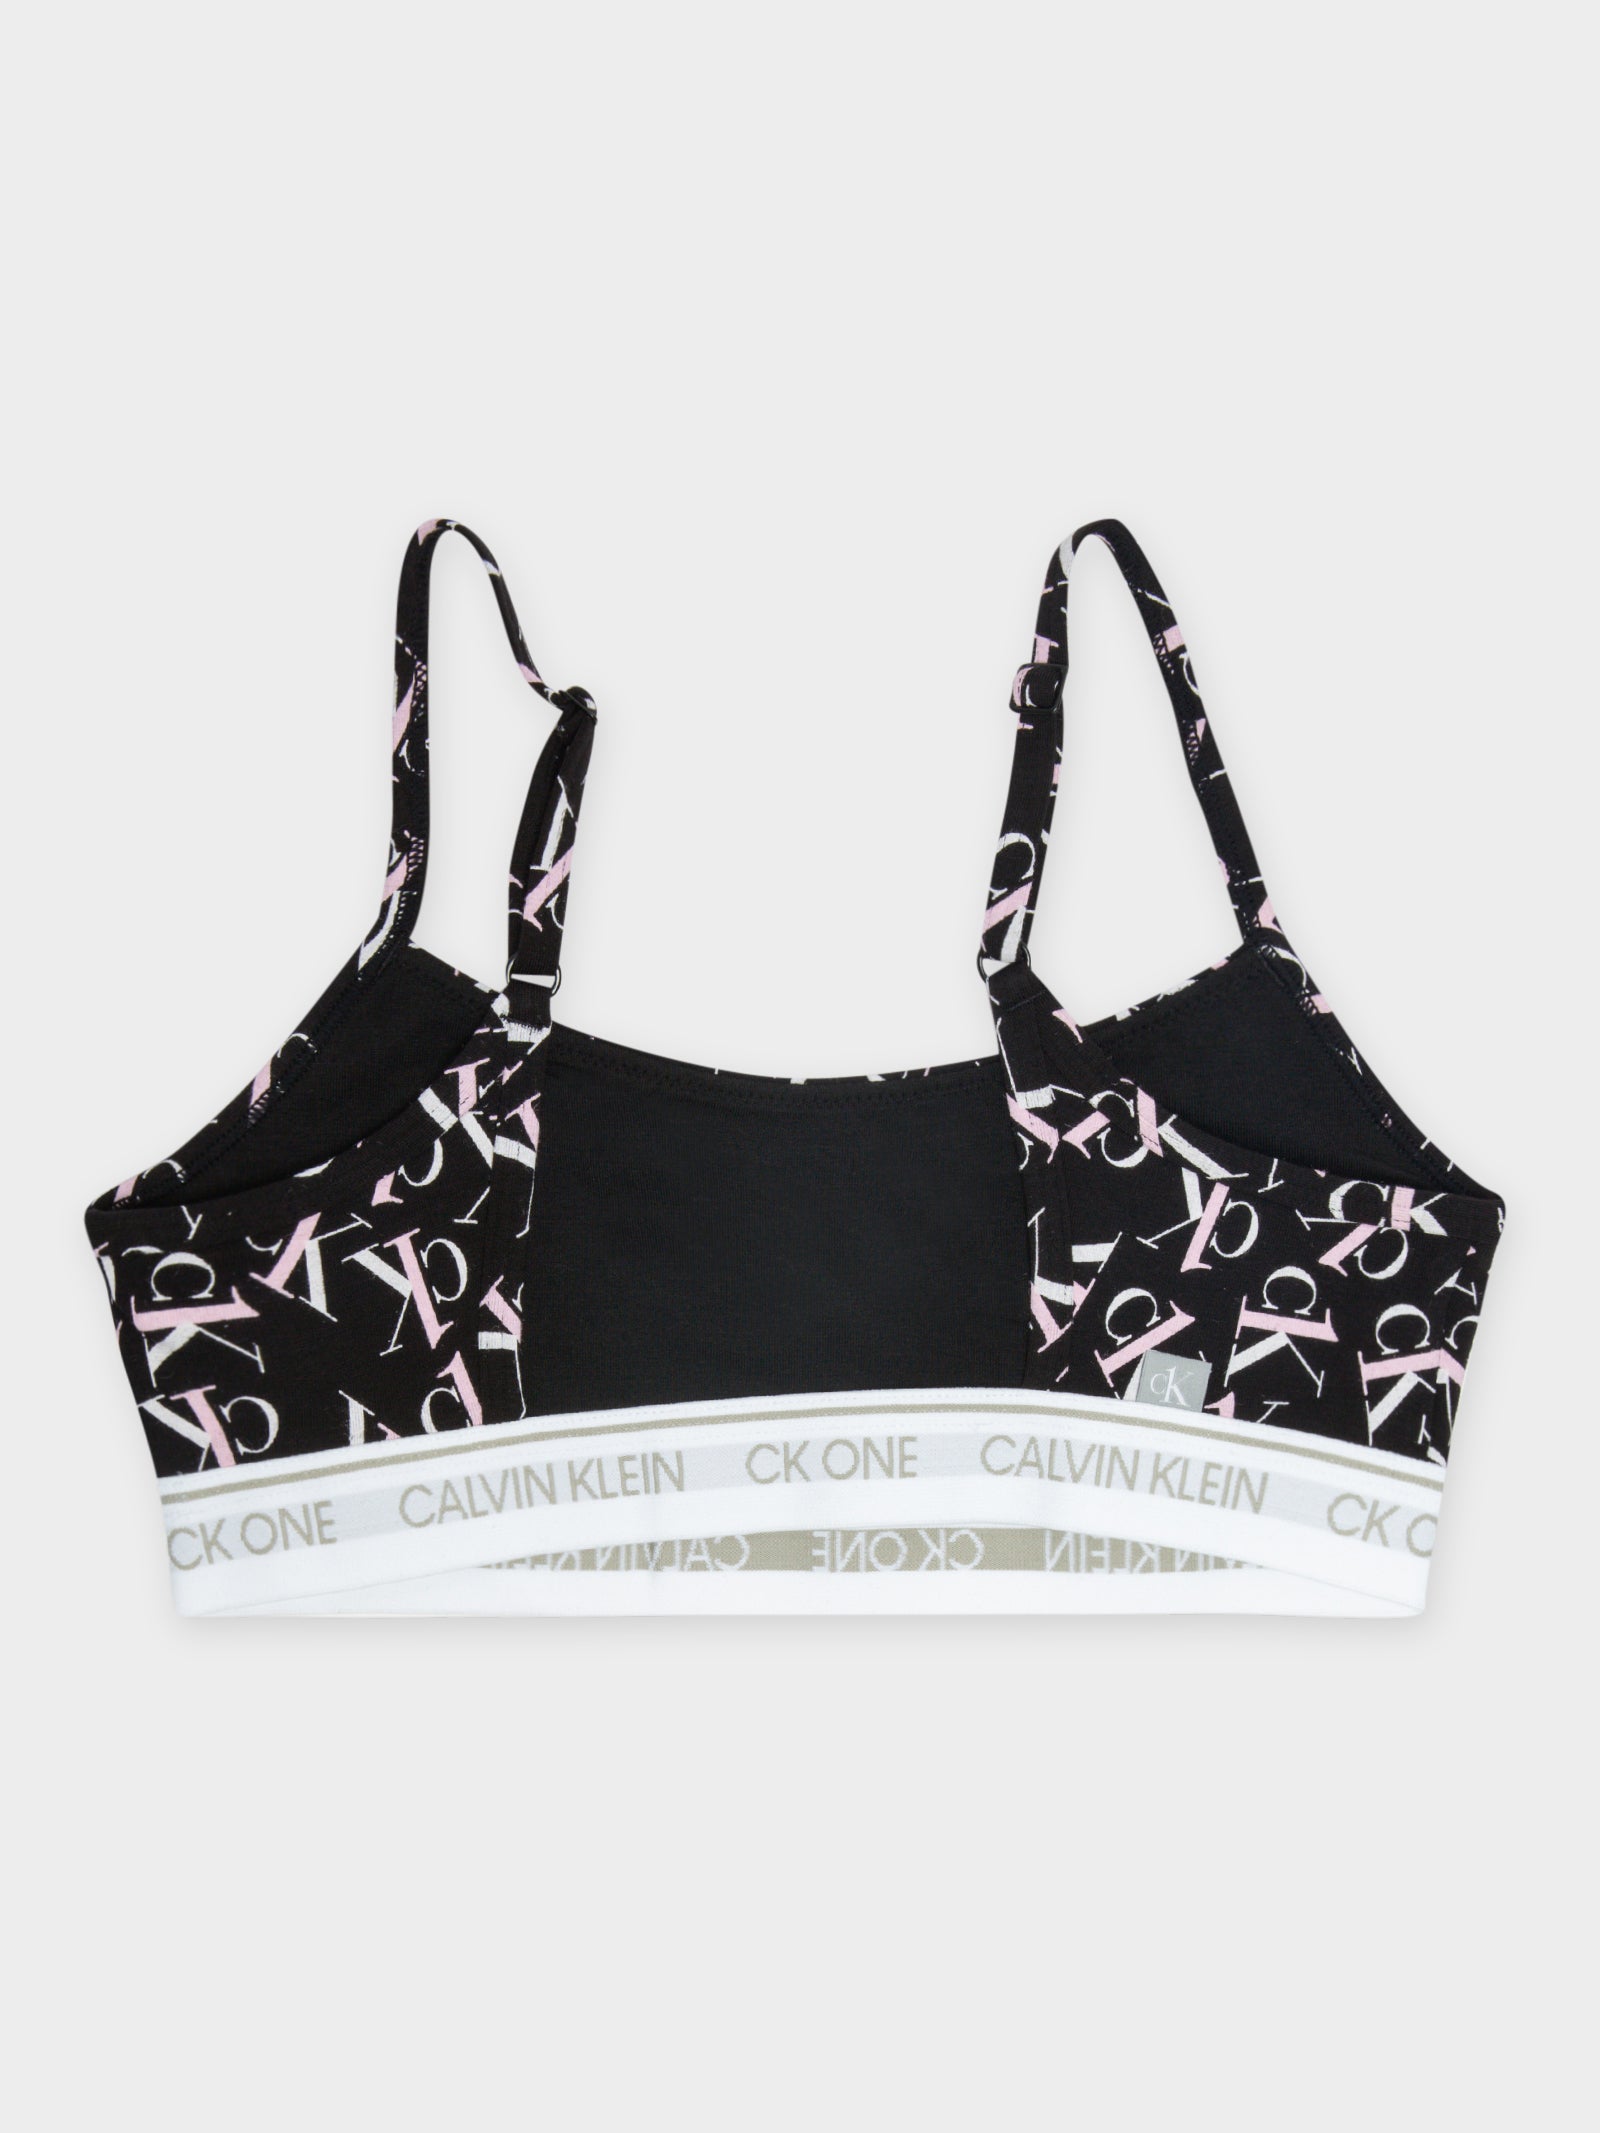 CK One Cotton Unlined Bralette in Black, White & Sand Rose